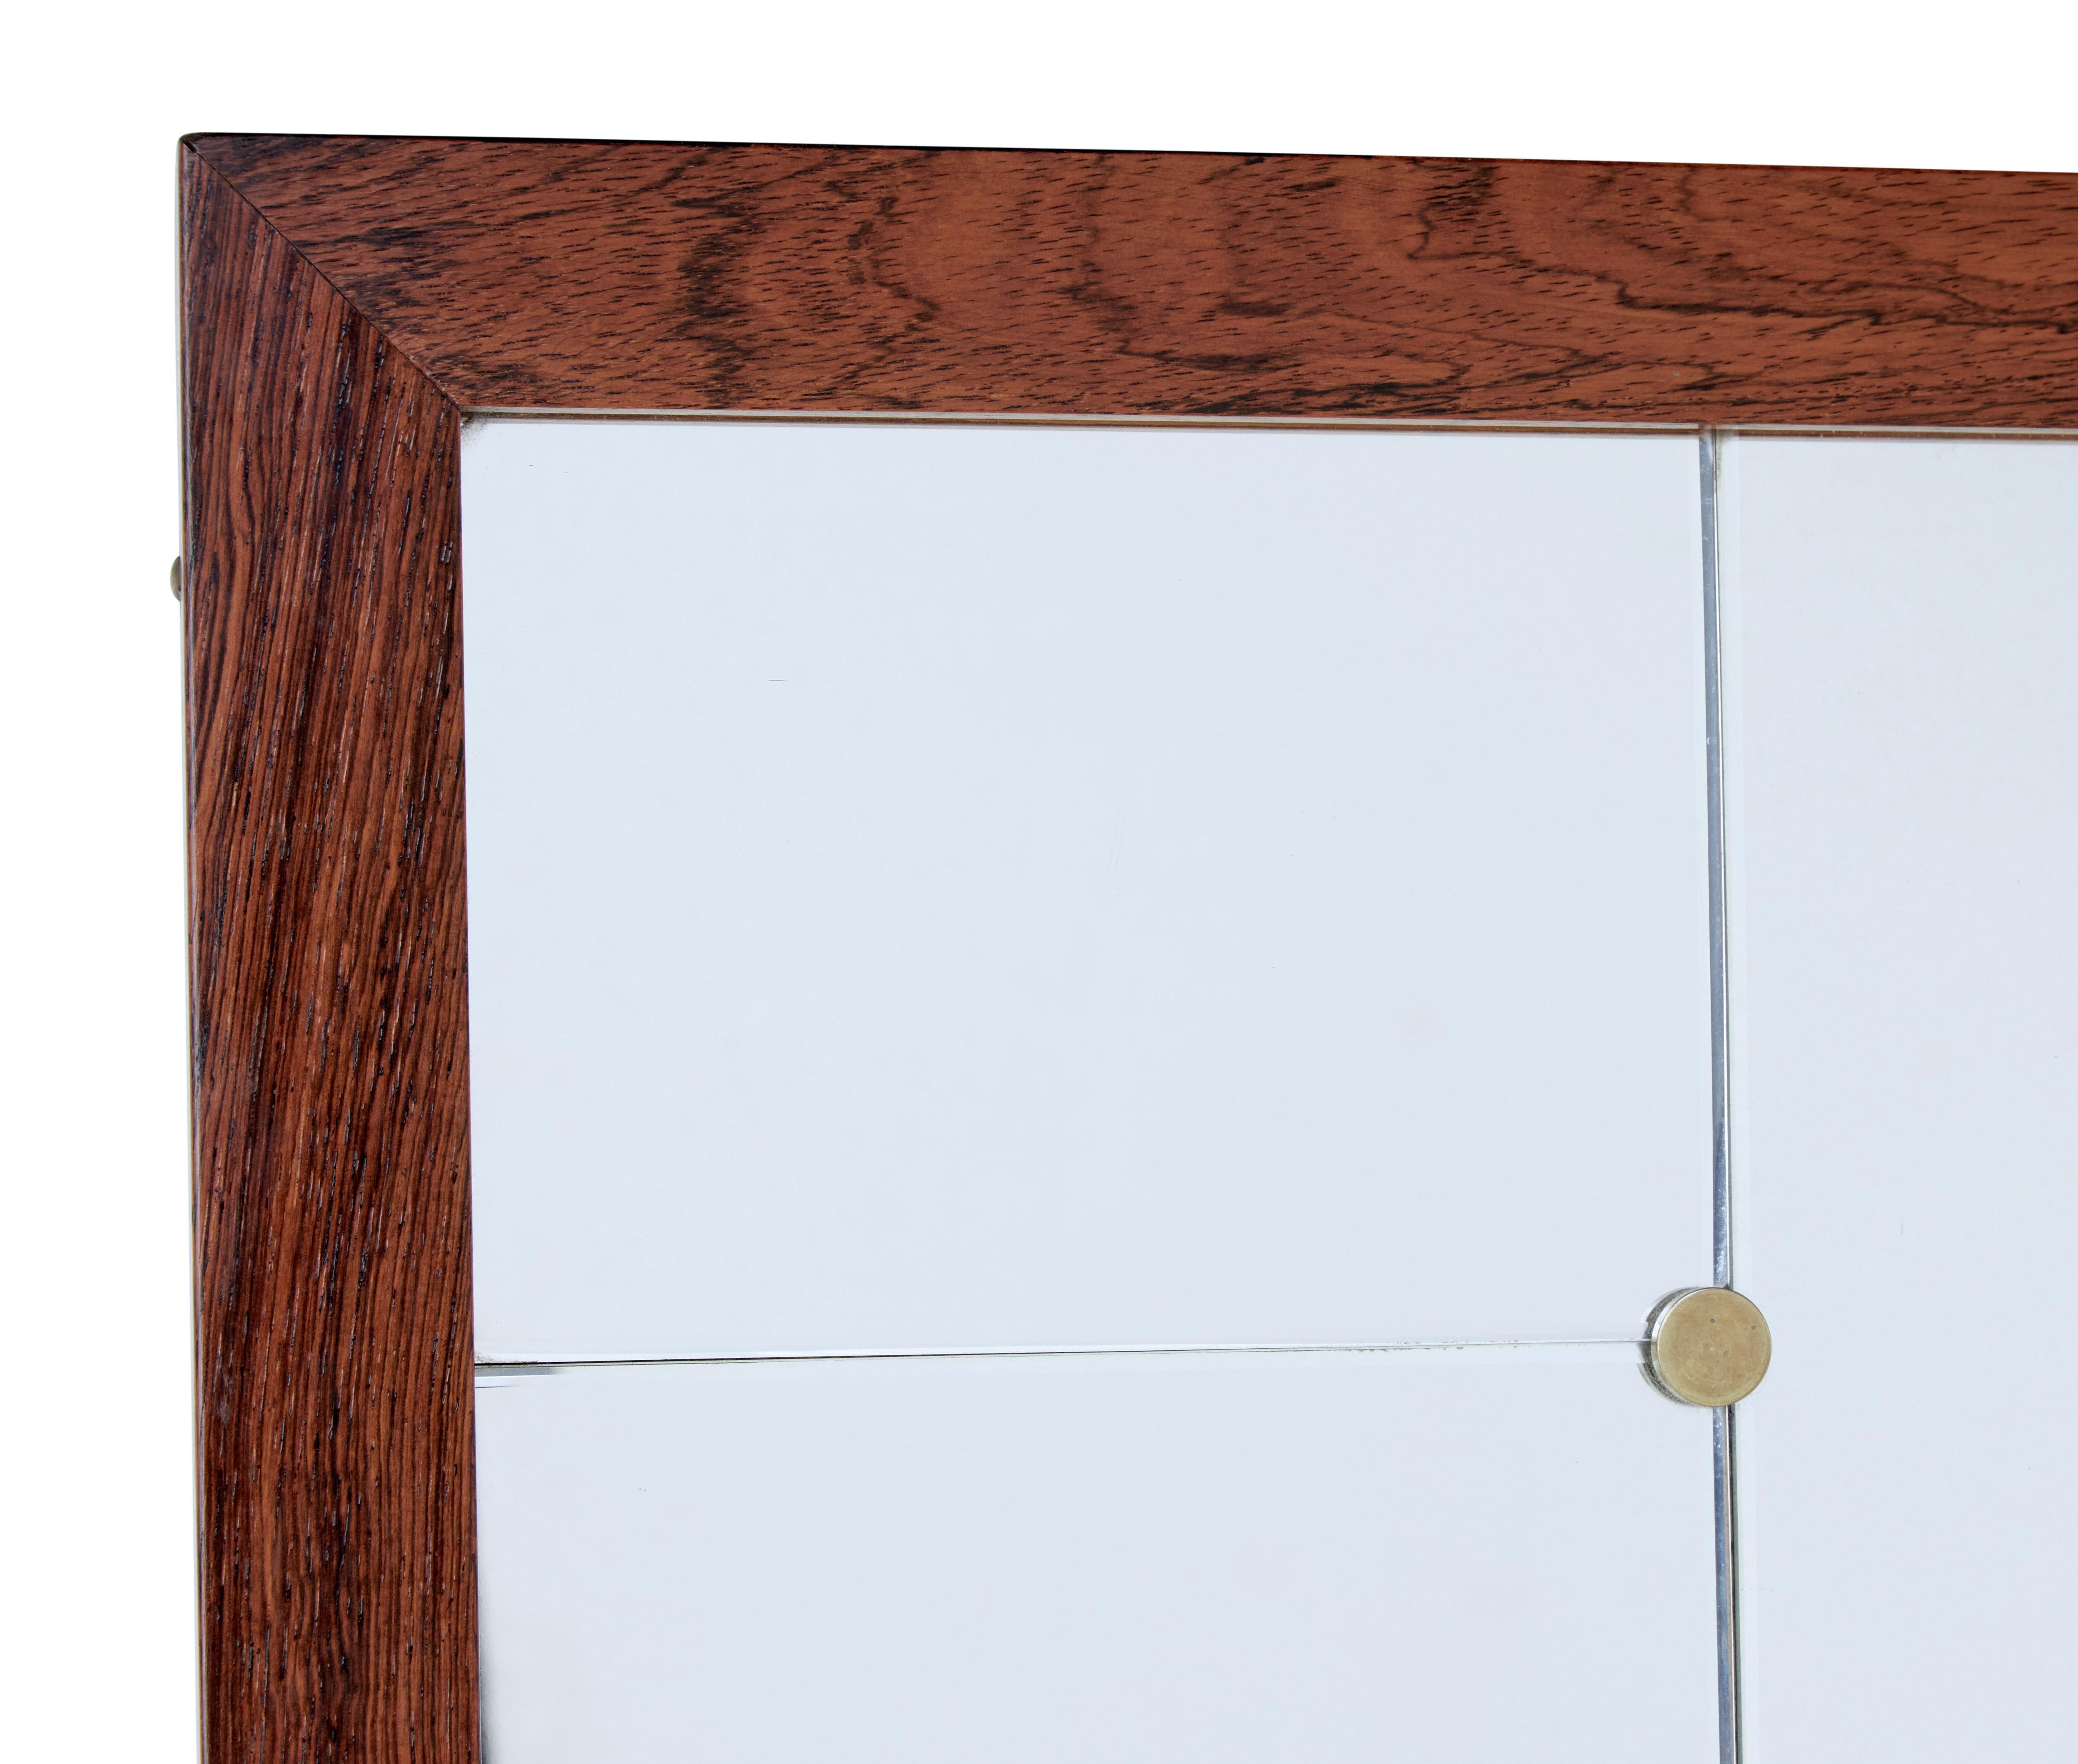 Large mid-20th century palisander wall mirror by Glas and Tra circa 1950.

Large and heavy wall mirror in the Art Deco style by well known Swedish makers Glas and Tra. Palisander veneered frame. Central portrait mirror flanked either side by